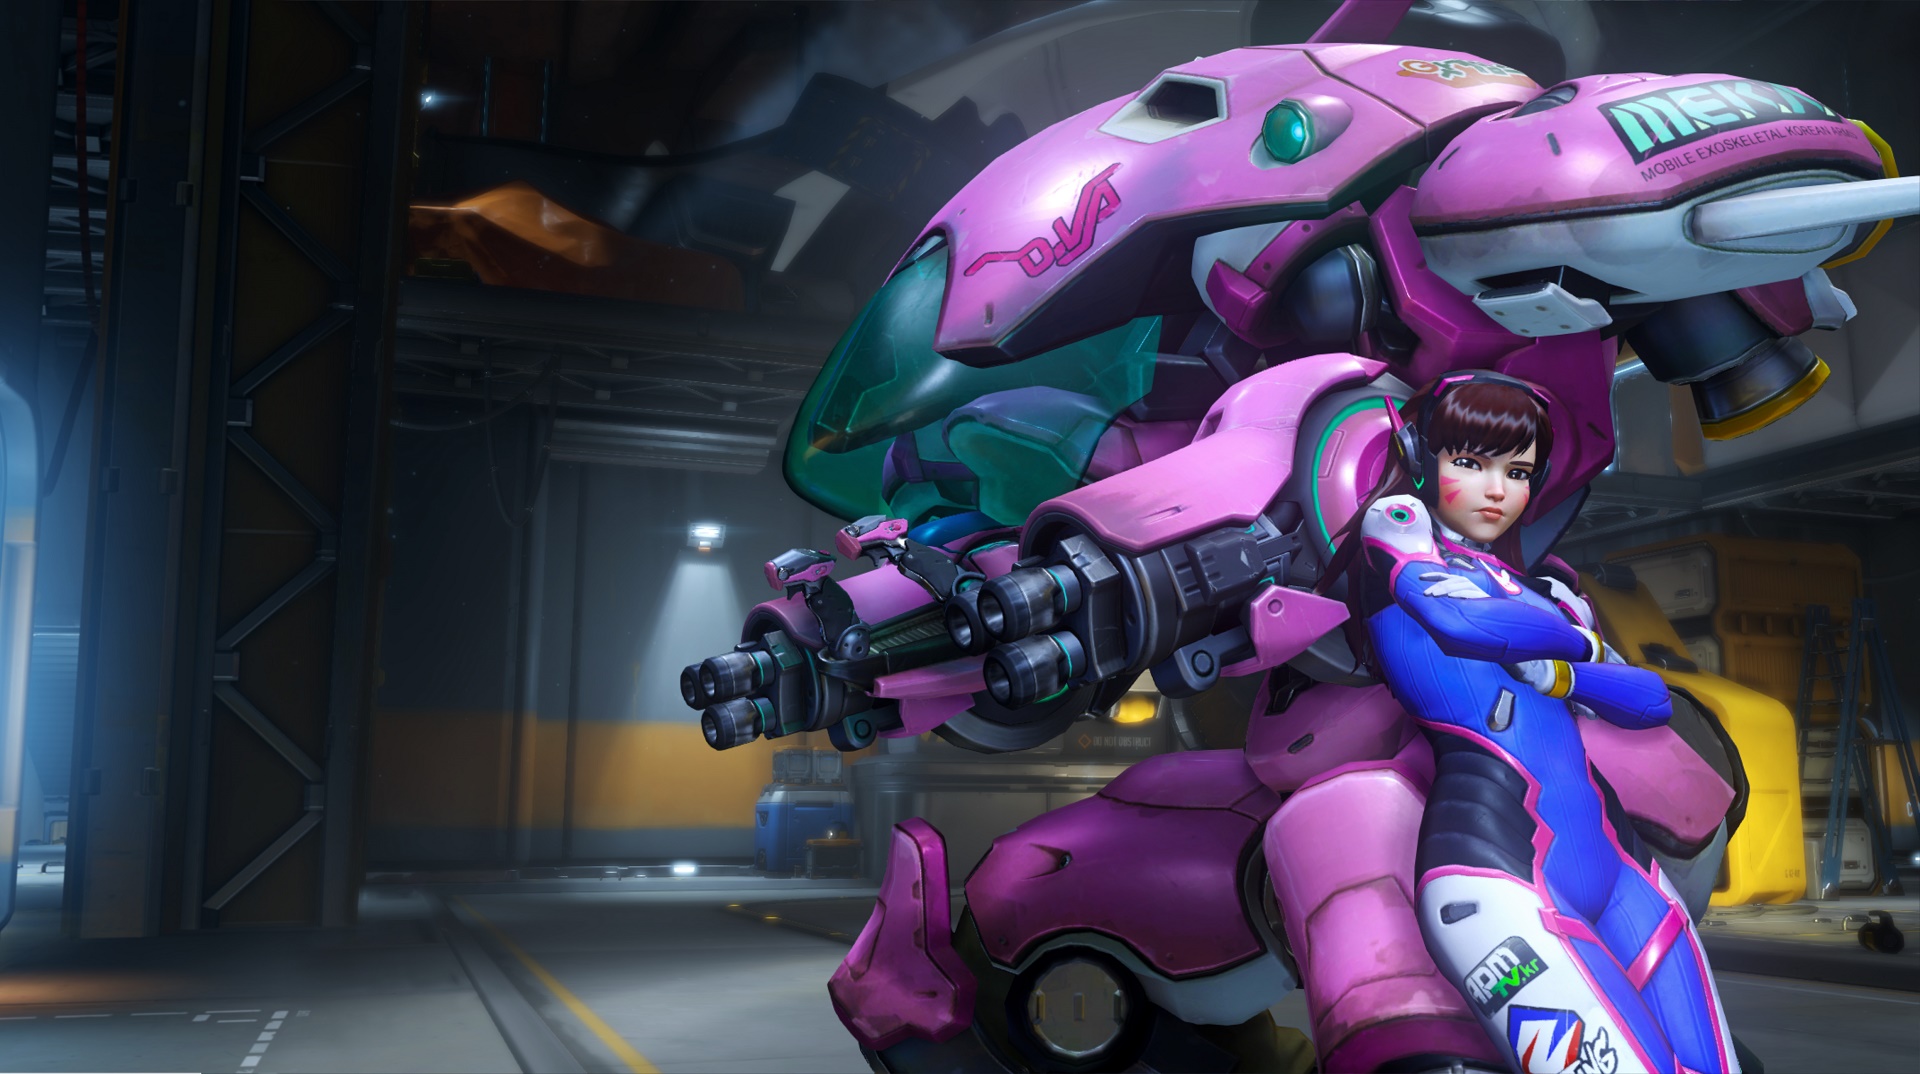 Overwatch is now slated for a Spring release on PC Xbox One and